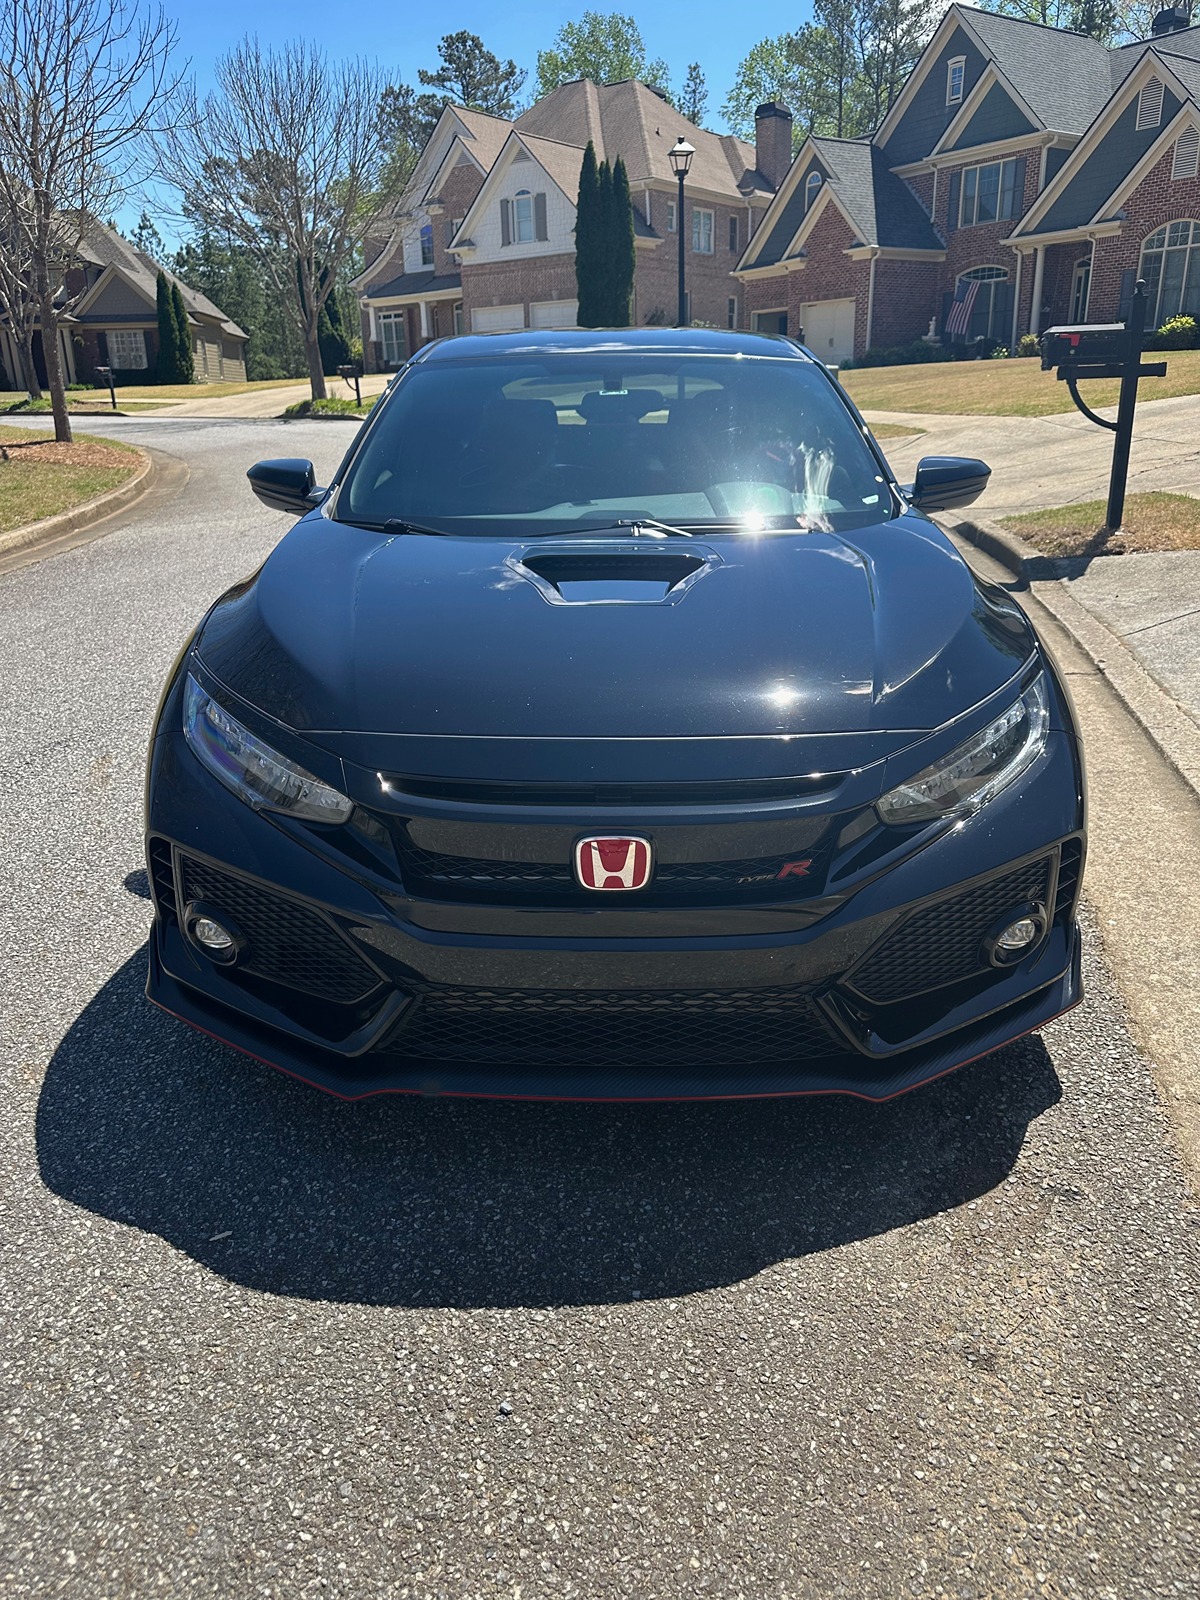 Honda Civic 10th gen Sold. 2019 Civic Type R for sale IMG_8116